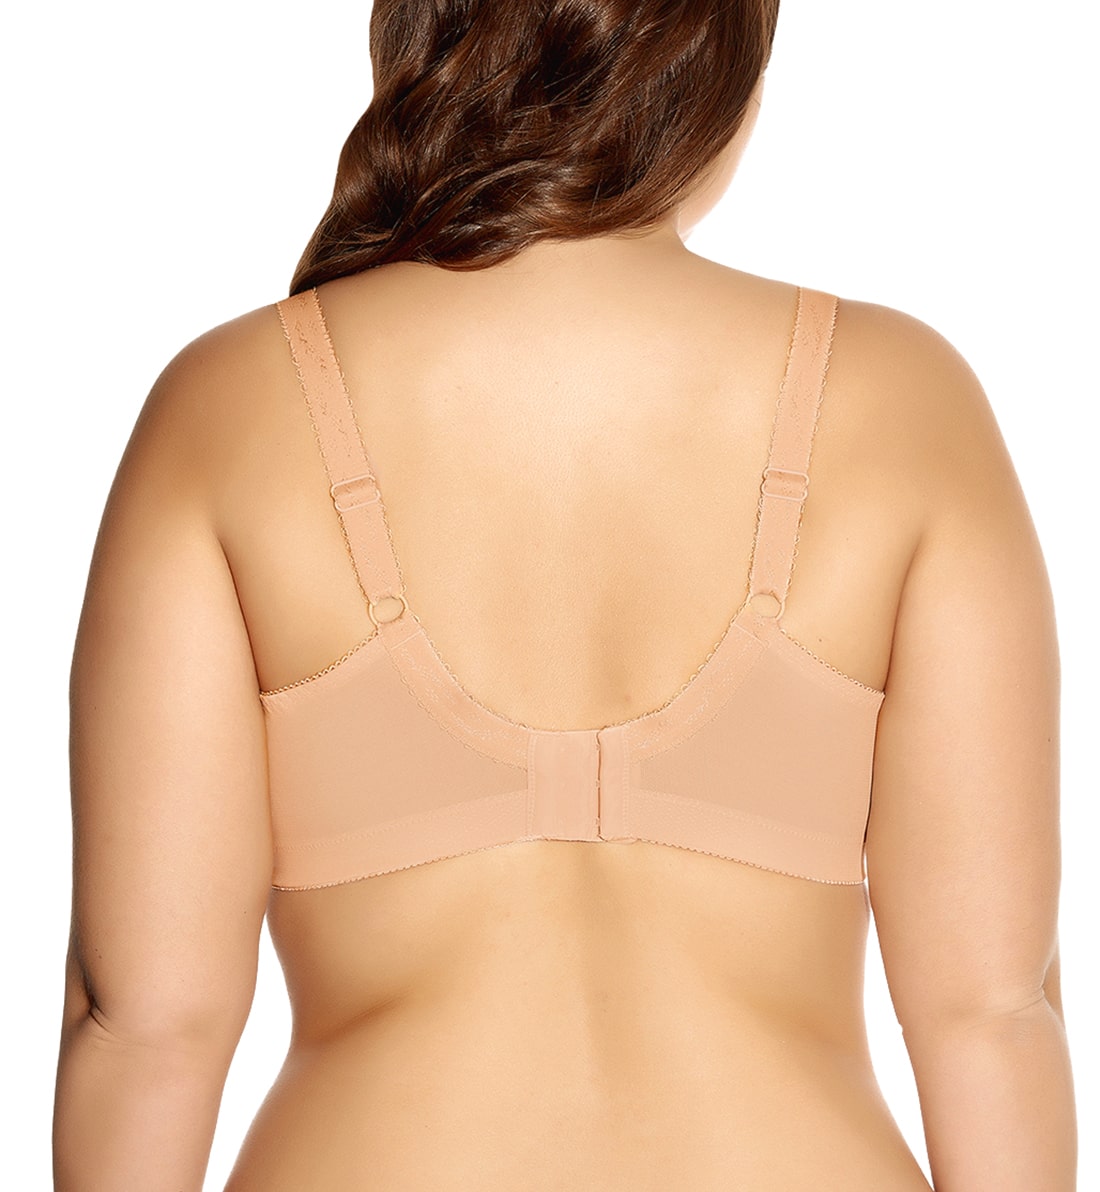 Goddess Alice Support Softcup Bra (6040),34H,Nude - Nude,34H